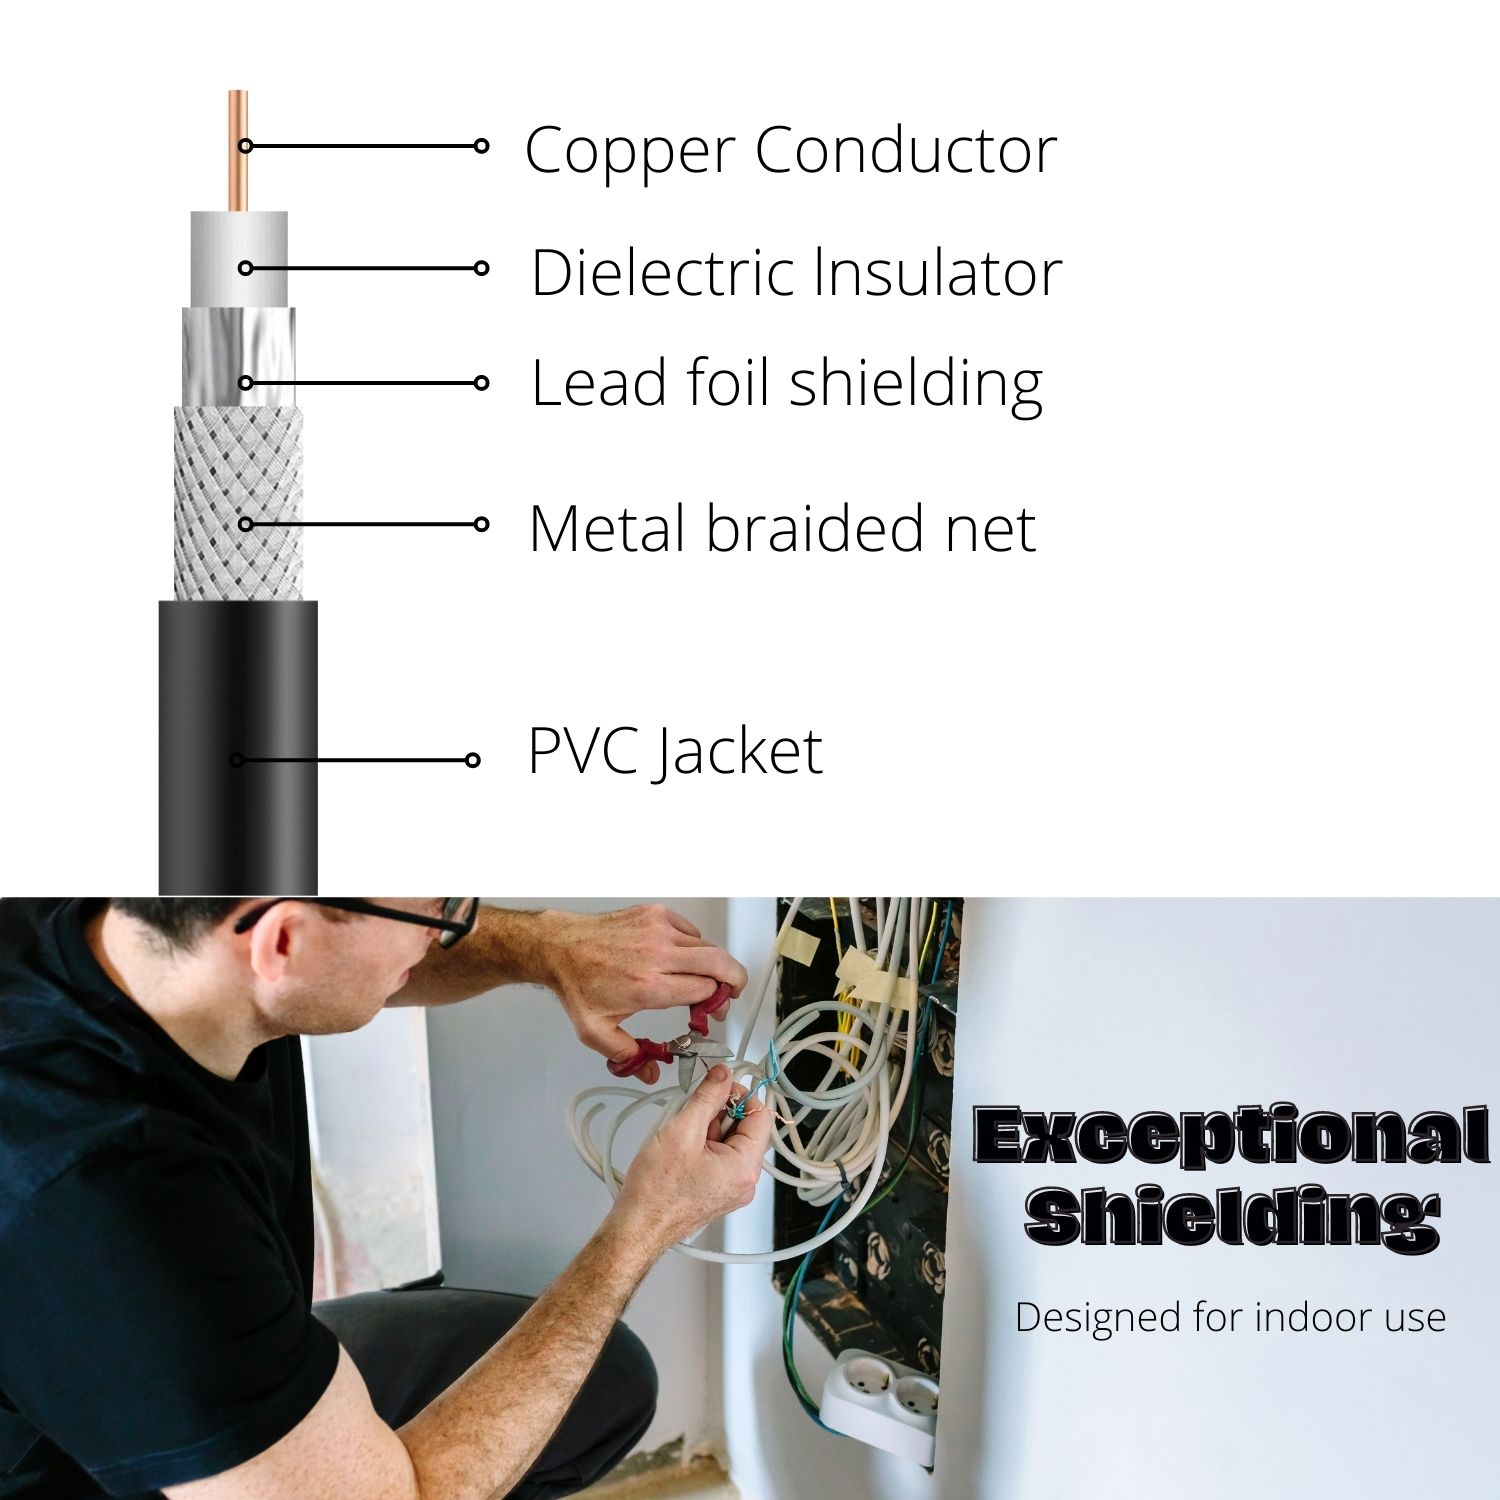 Gold-Plated Precision - Our Coaxial Cable Extender has gold-plated connectors to ensure minimal interference, reduced distortion, & signal loss, for a clear, detailed, & dramatic transmissions every time